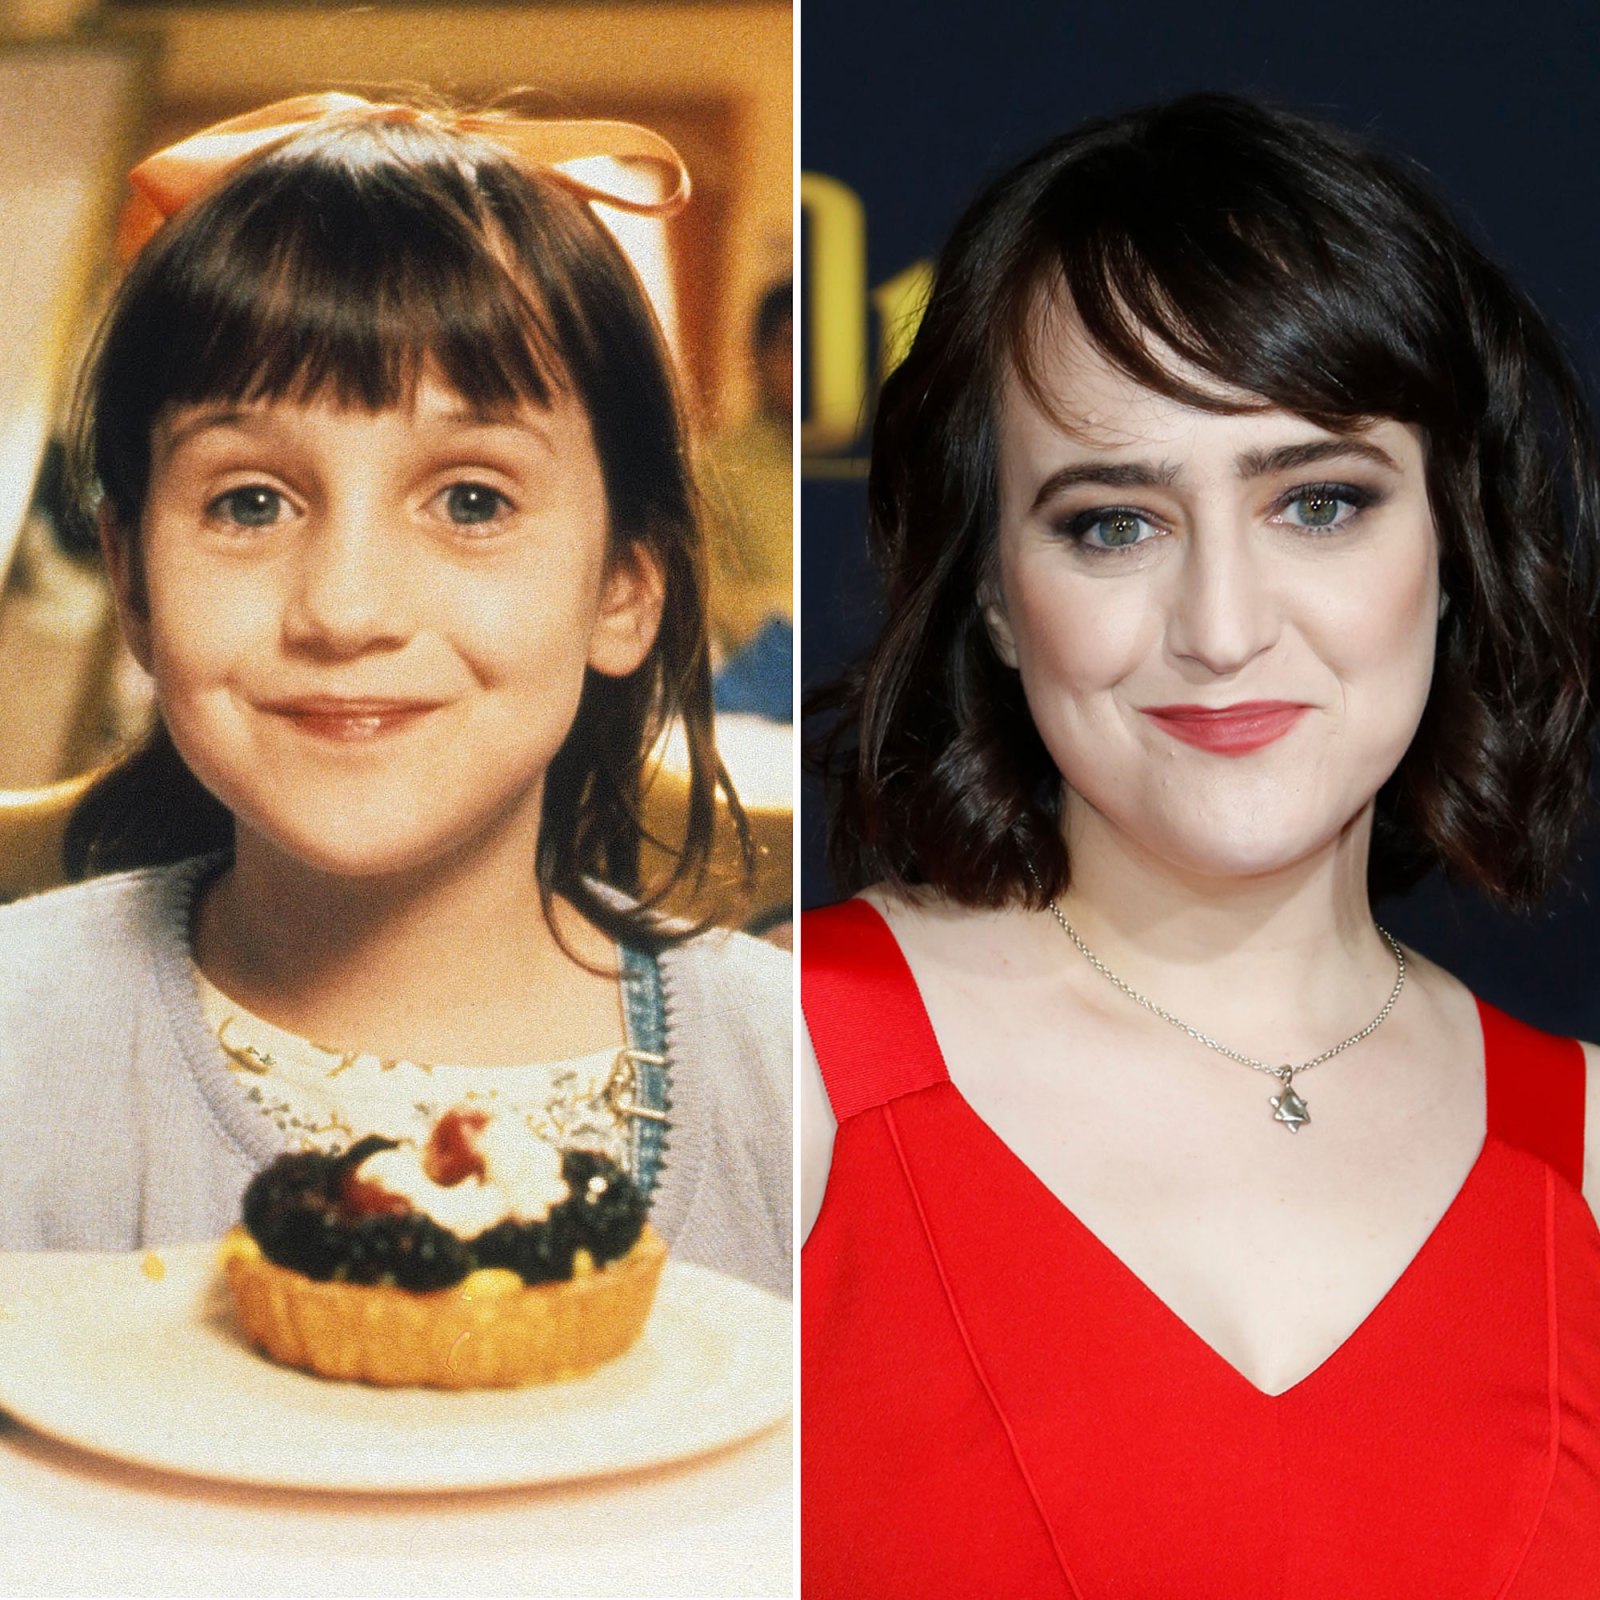 Matilda Where Are They Now